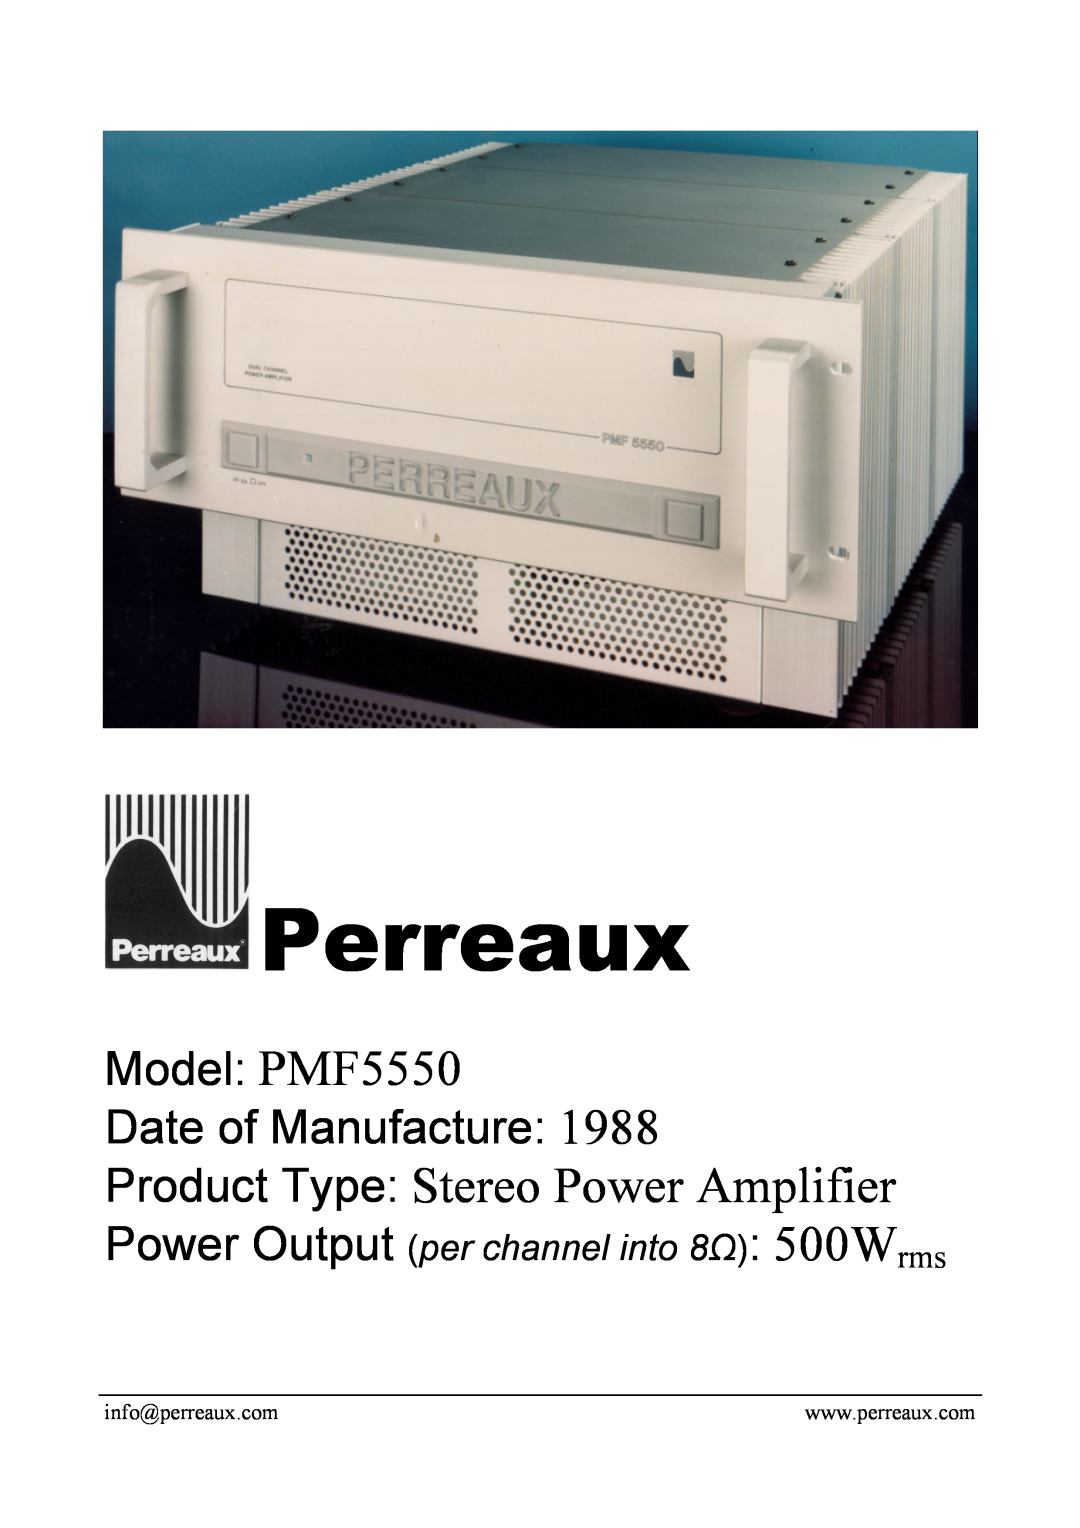 Perreaux manual Perreaux, Product Type Stereo Power Amplifier, Model PMF5550 Date of Manufacture 